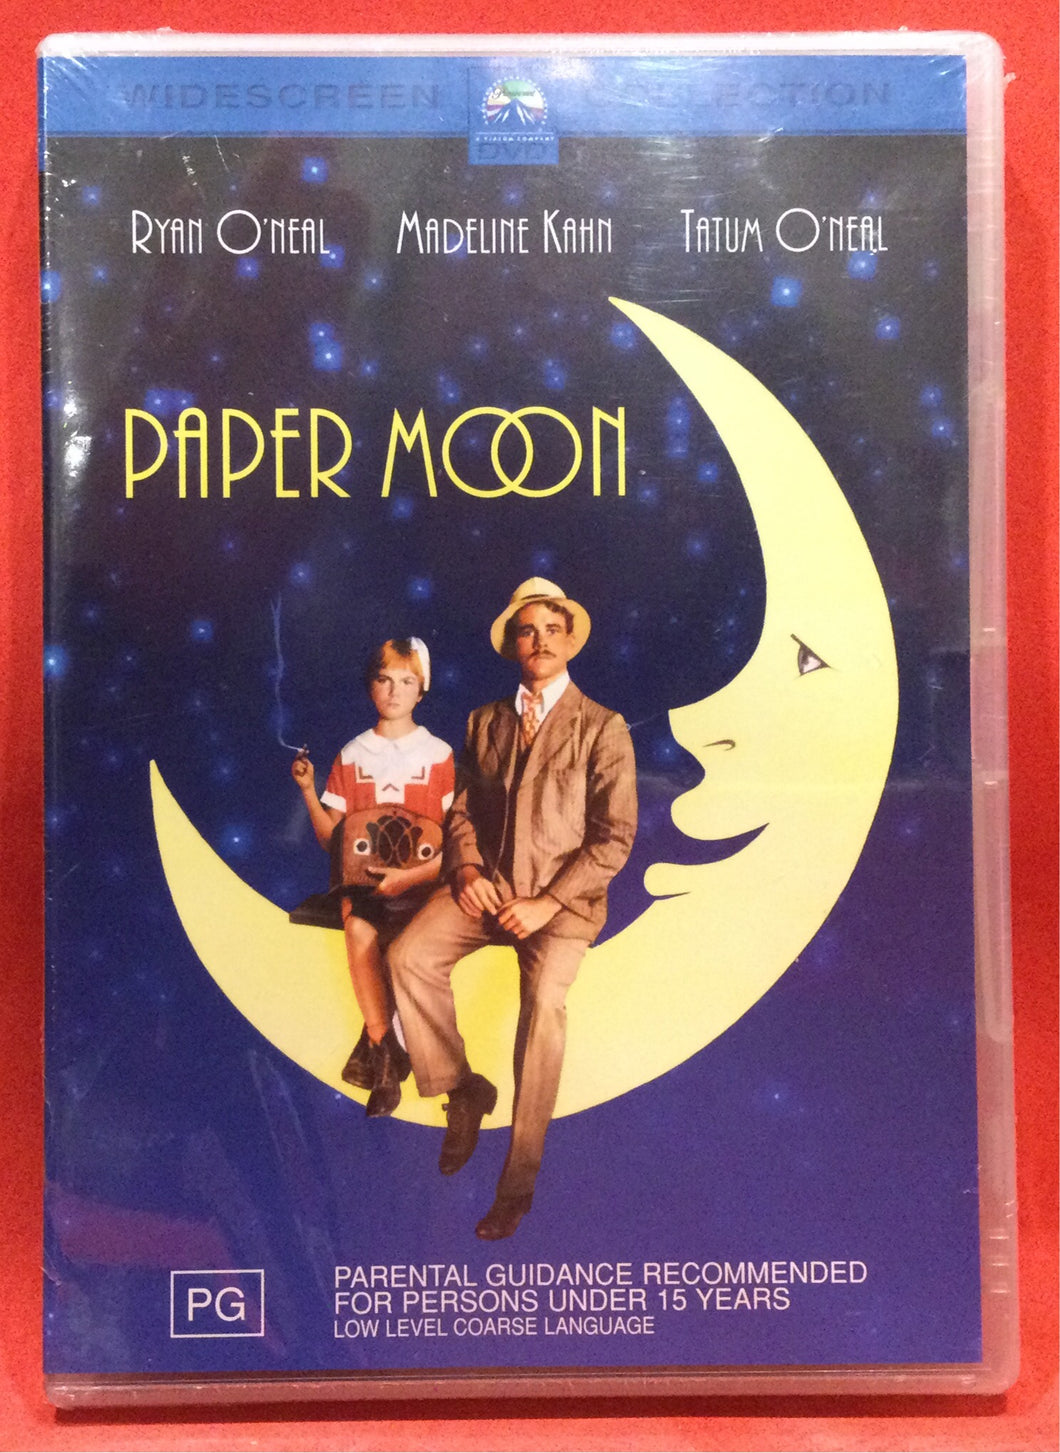 PAPER MOON - DVD (SEALED)